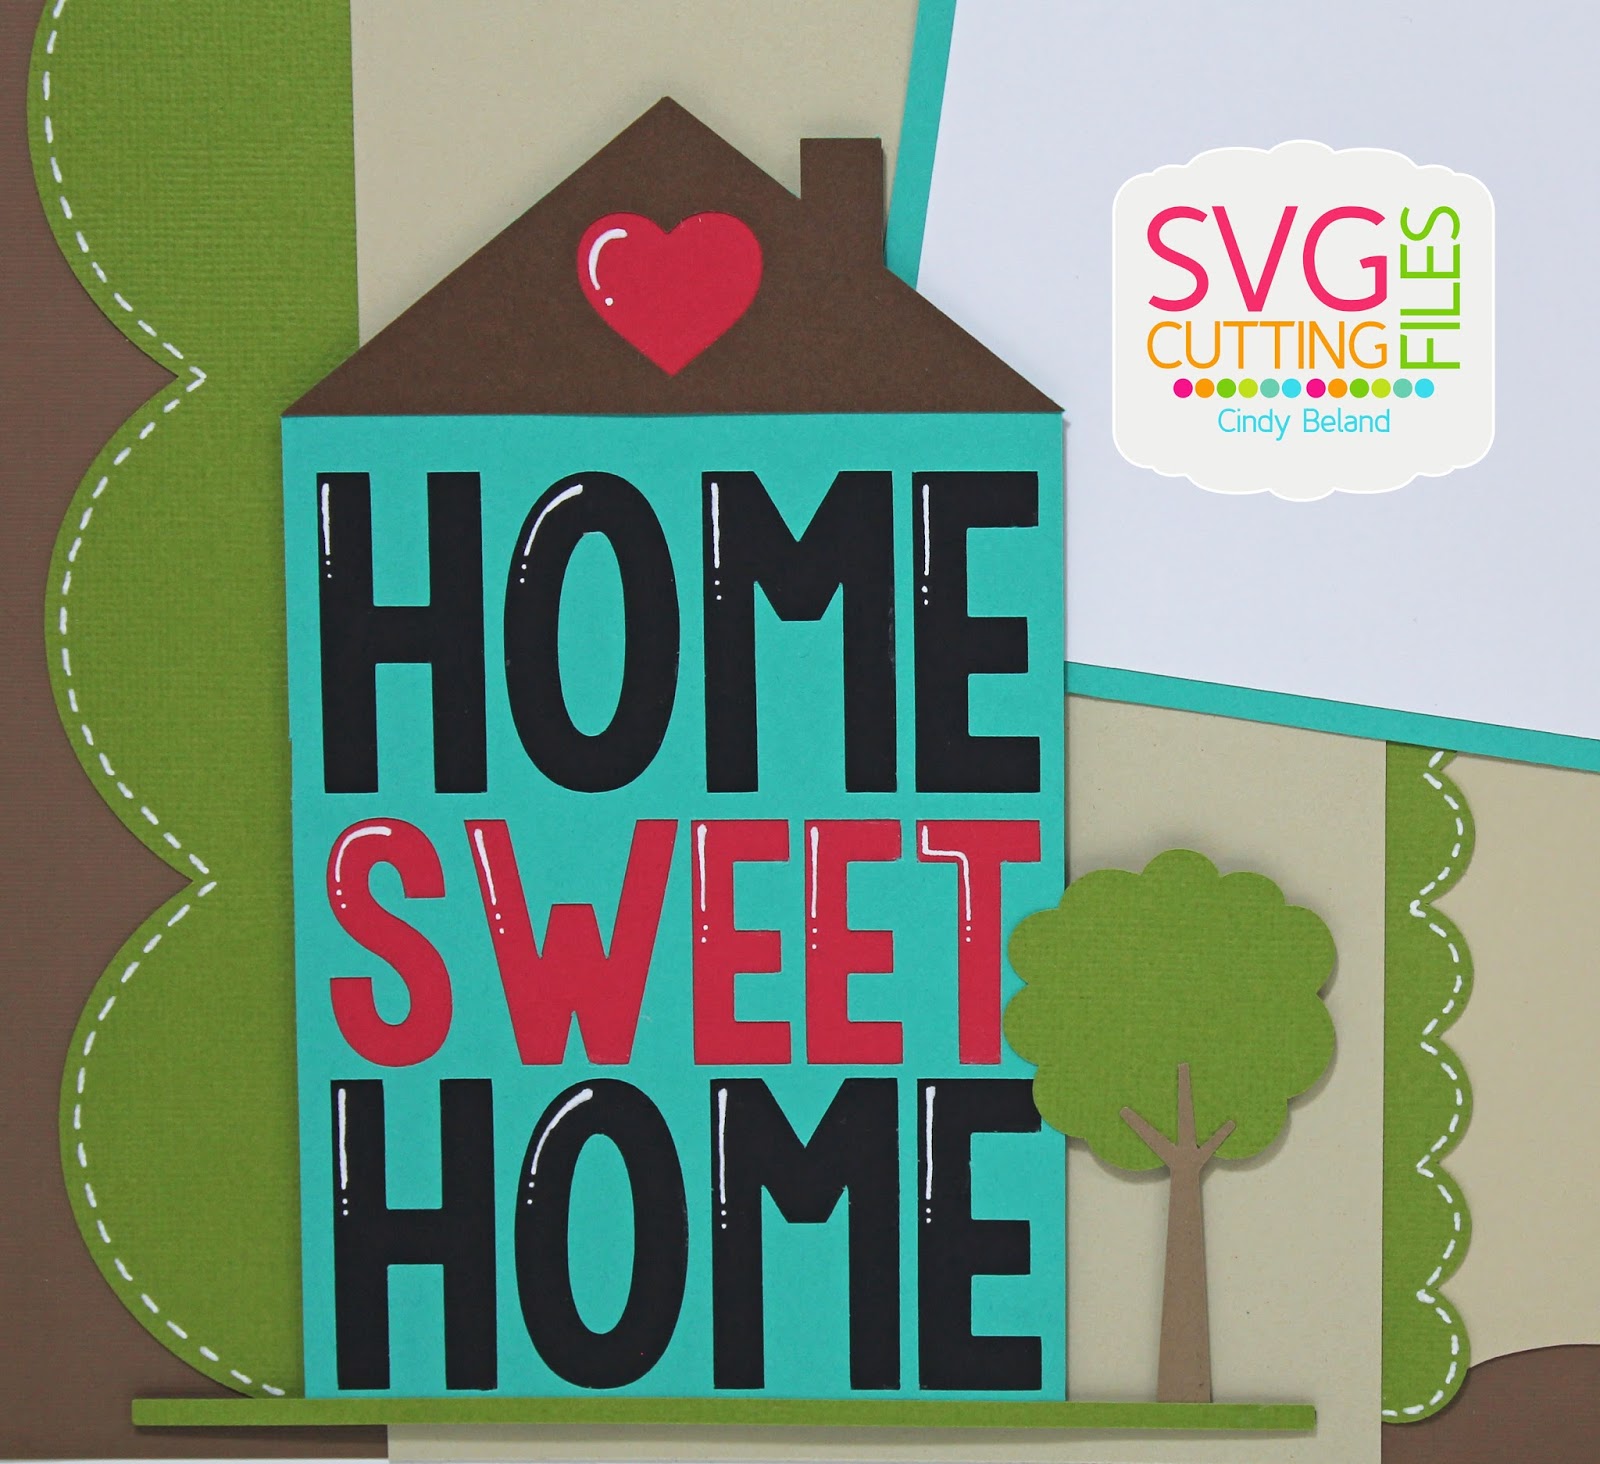 Download SVG Cutting Files: Home Sweet Home!!! :)